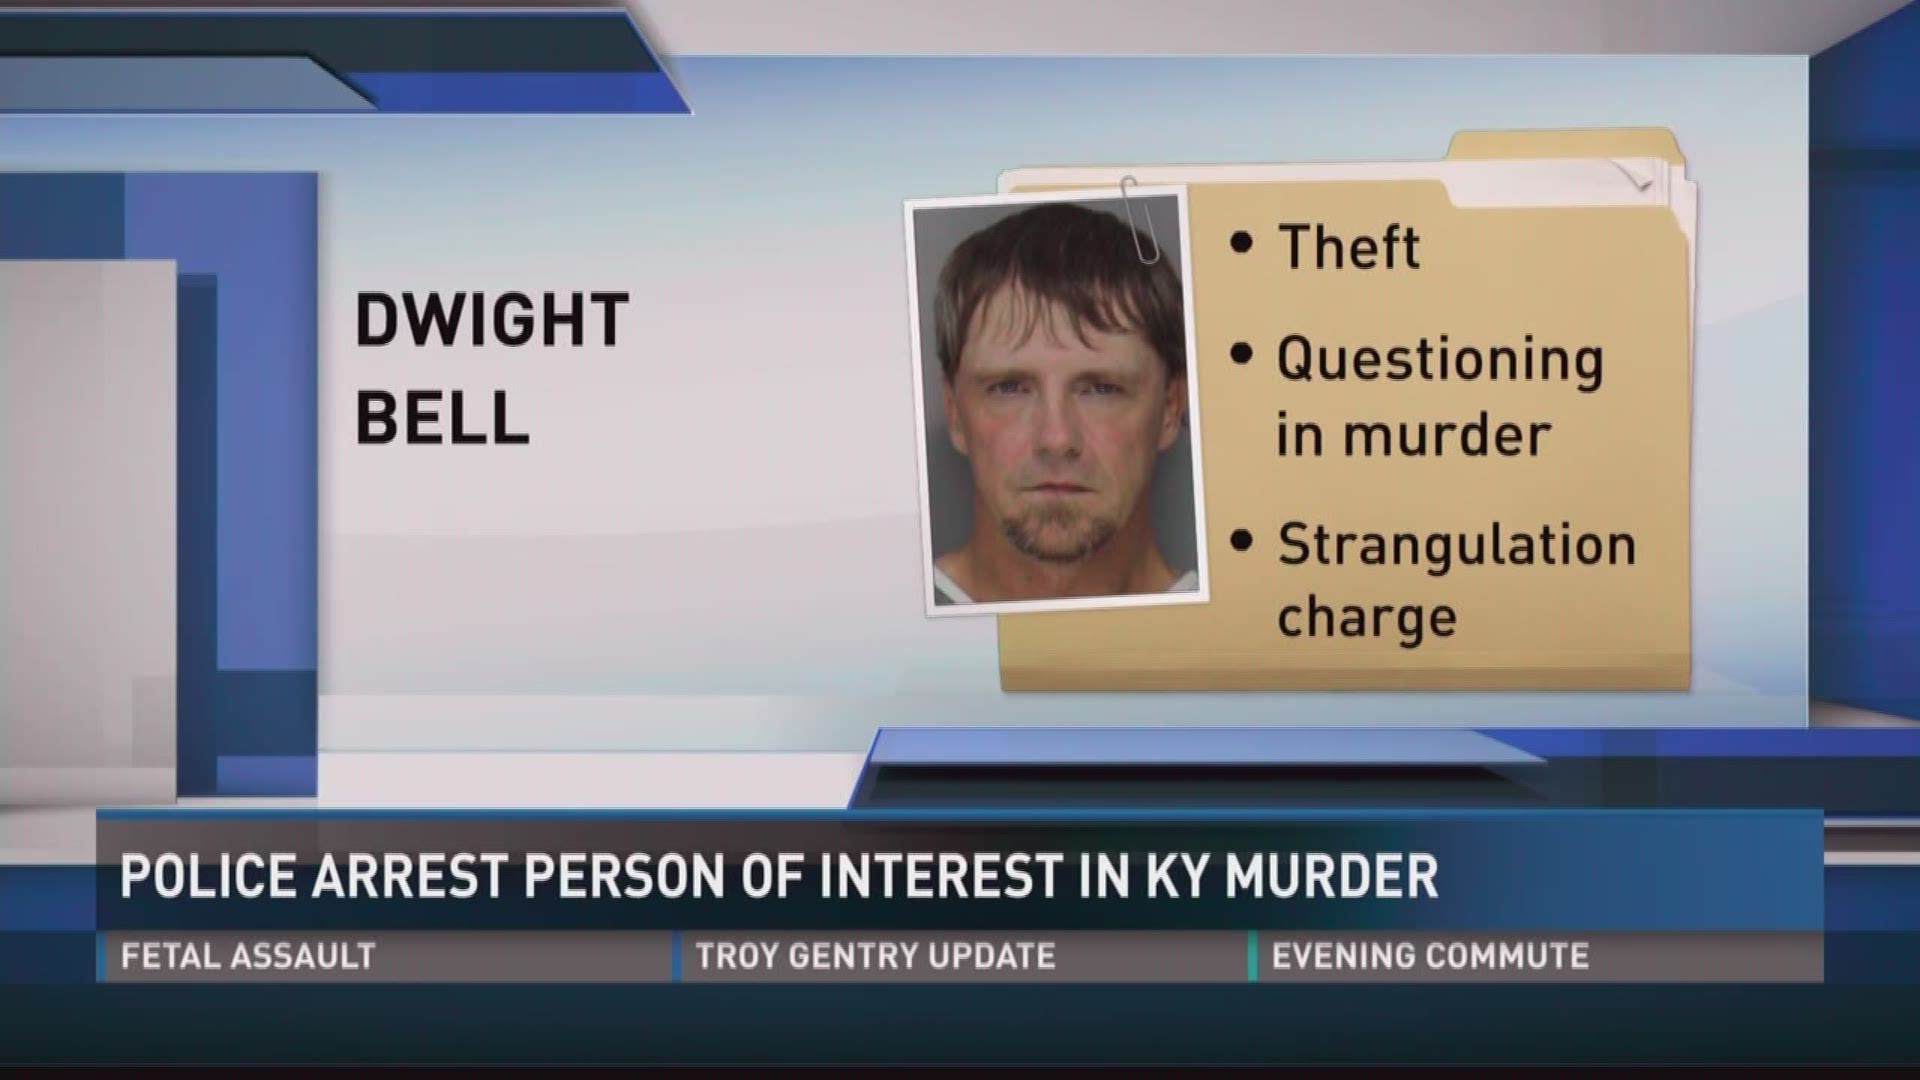 Dwight Bell was arrested in Dandridge. He's wanted for questioning in the murder of a woman at a Somerset church.